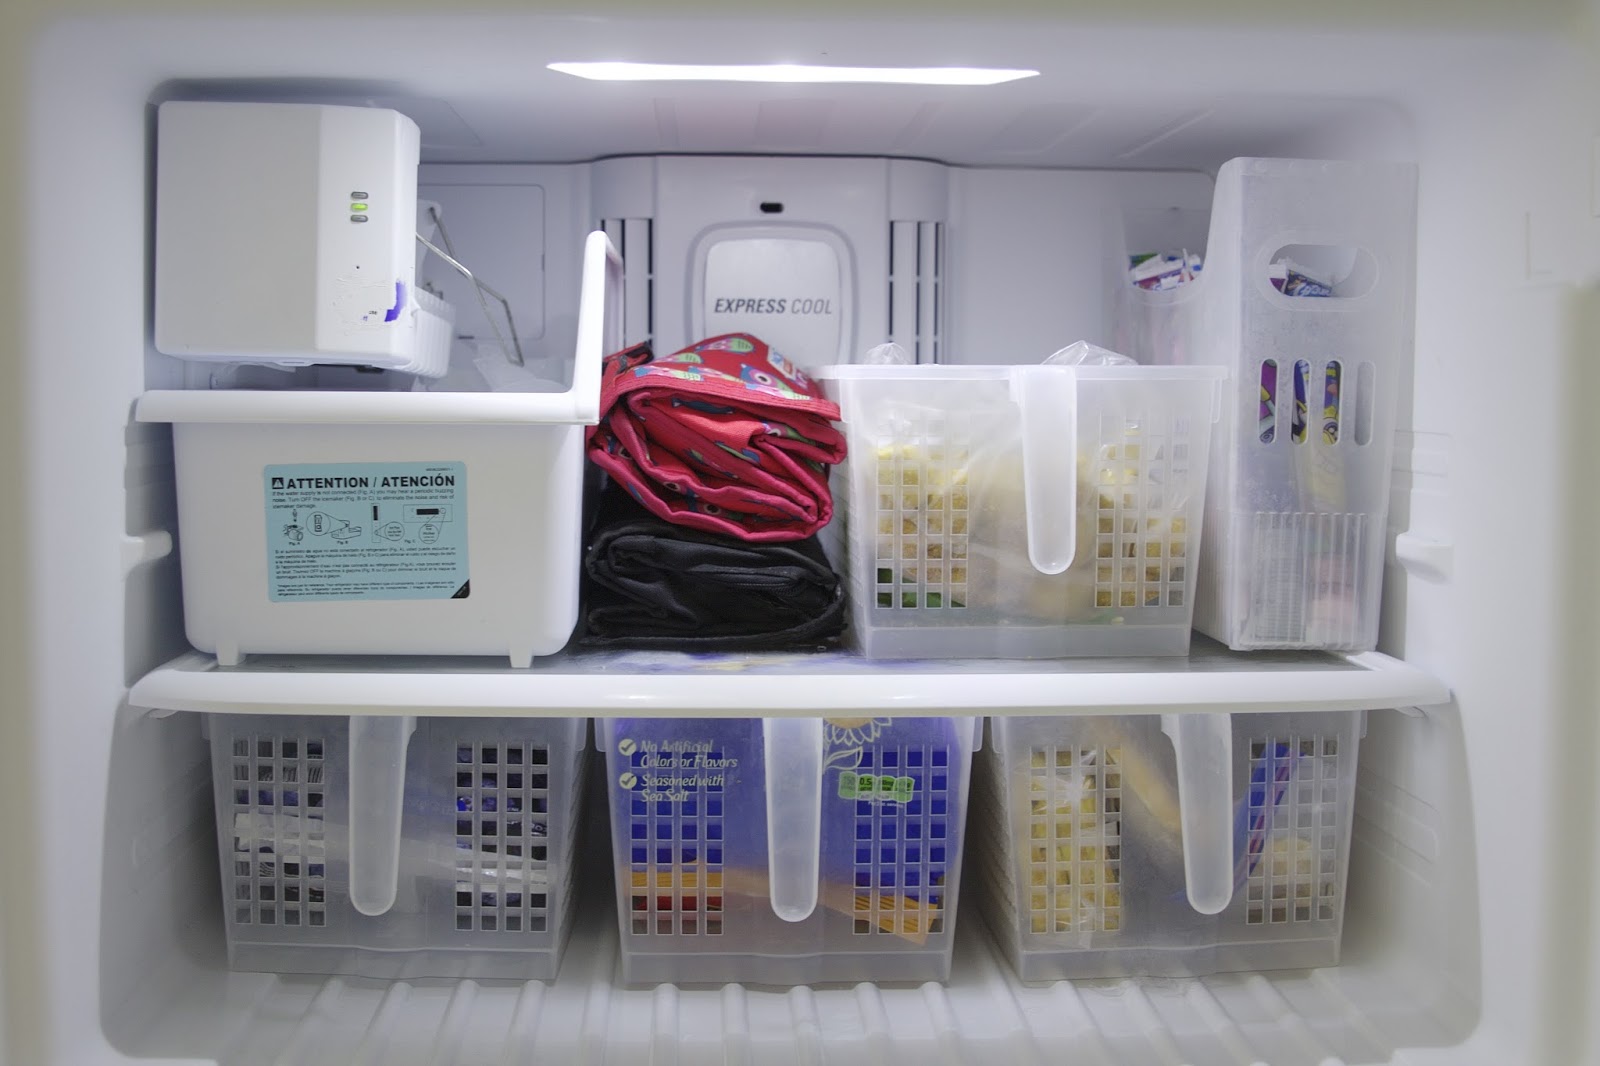 Tips for Organizing the Freezer